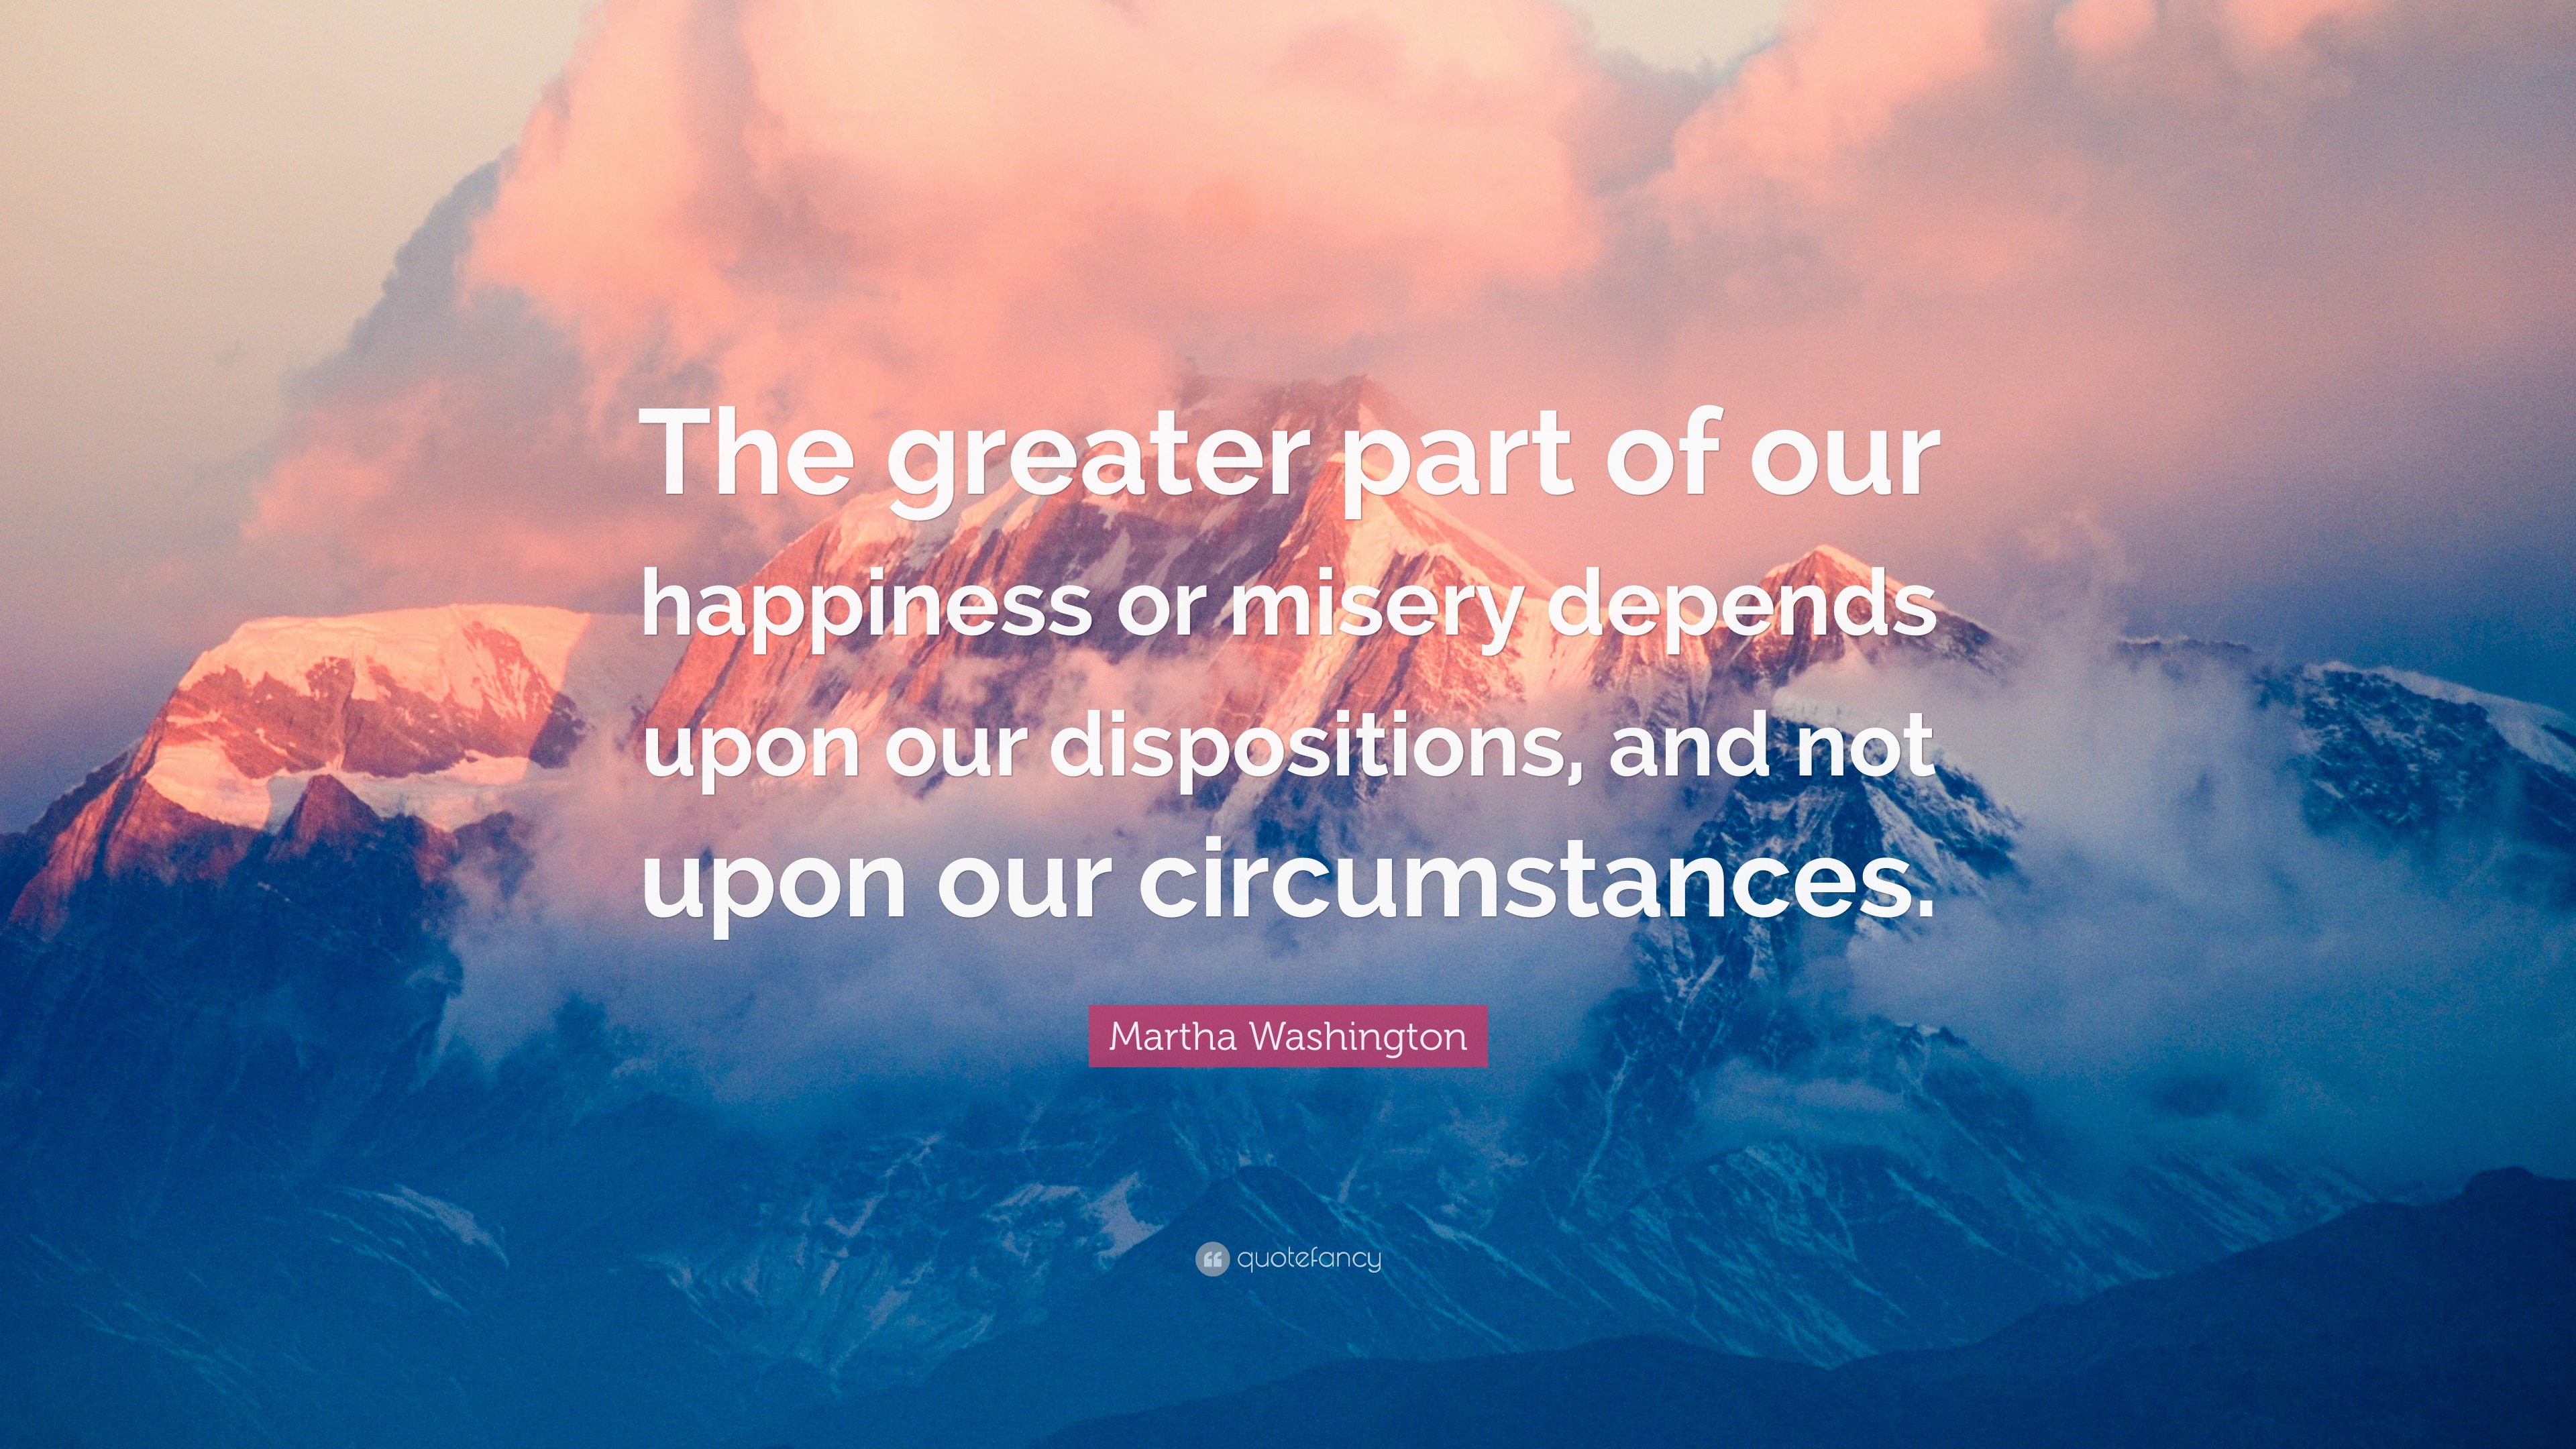 Martha Washington Quote: "The greater part of our happiness or misery depends upon our ...